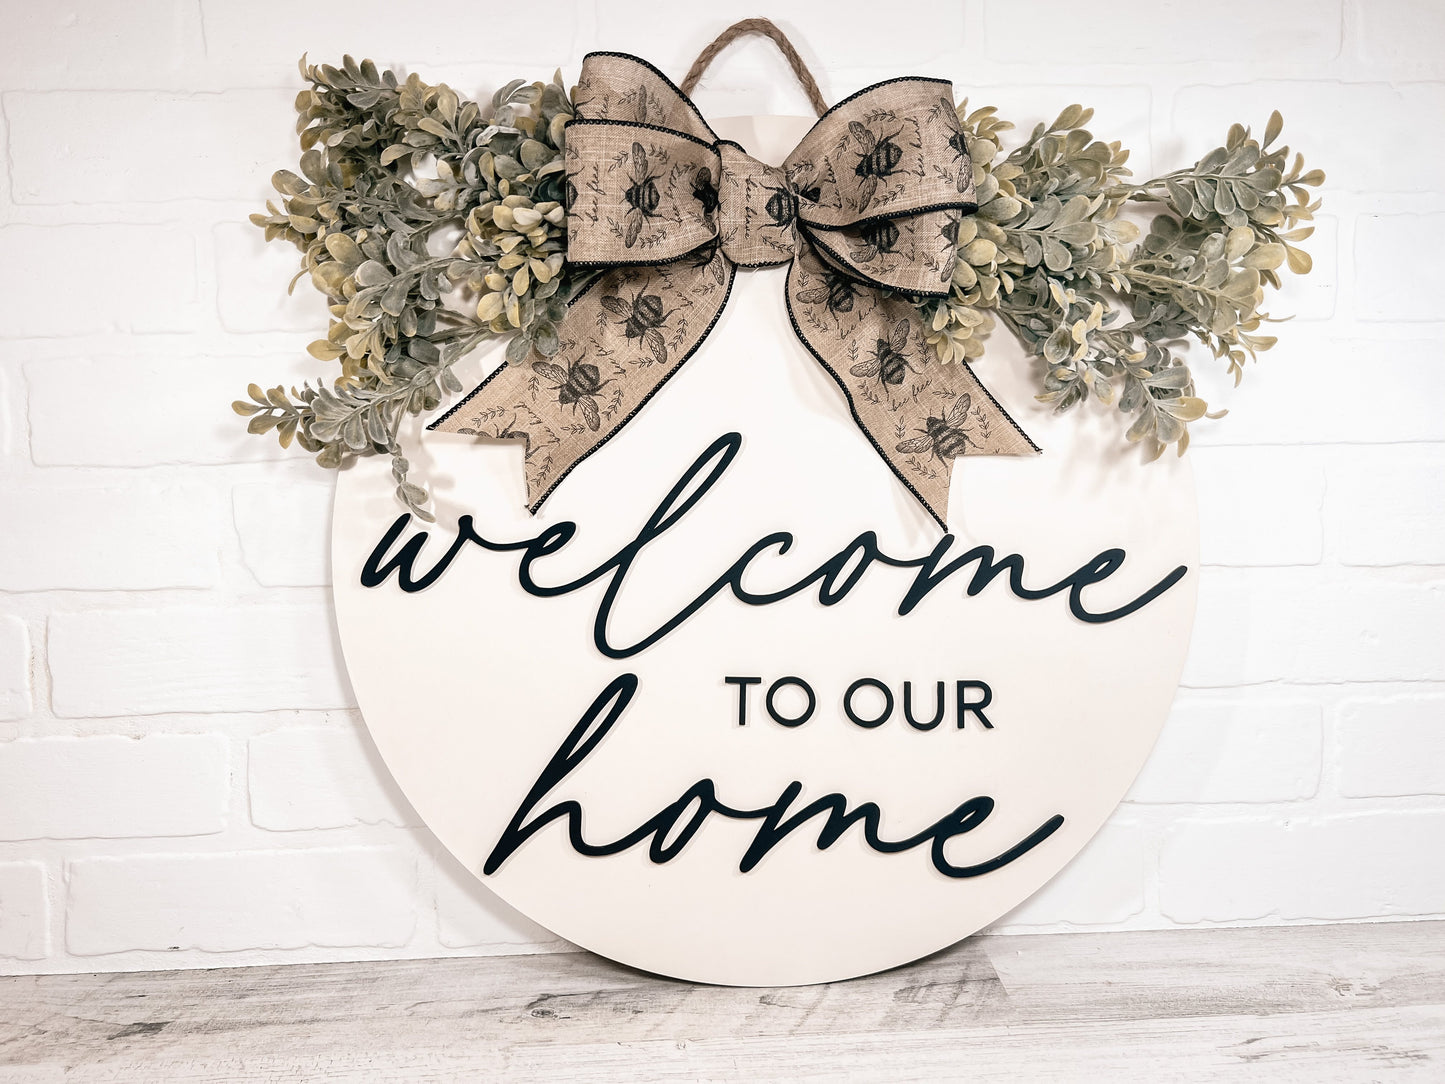 Welcome to our Home Door Hanger - B-Cozy Home Decor